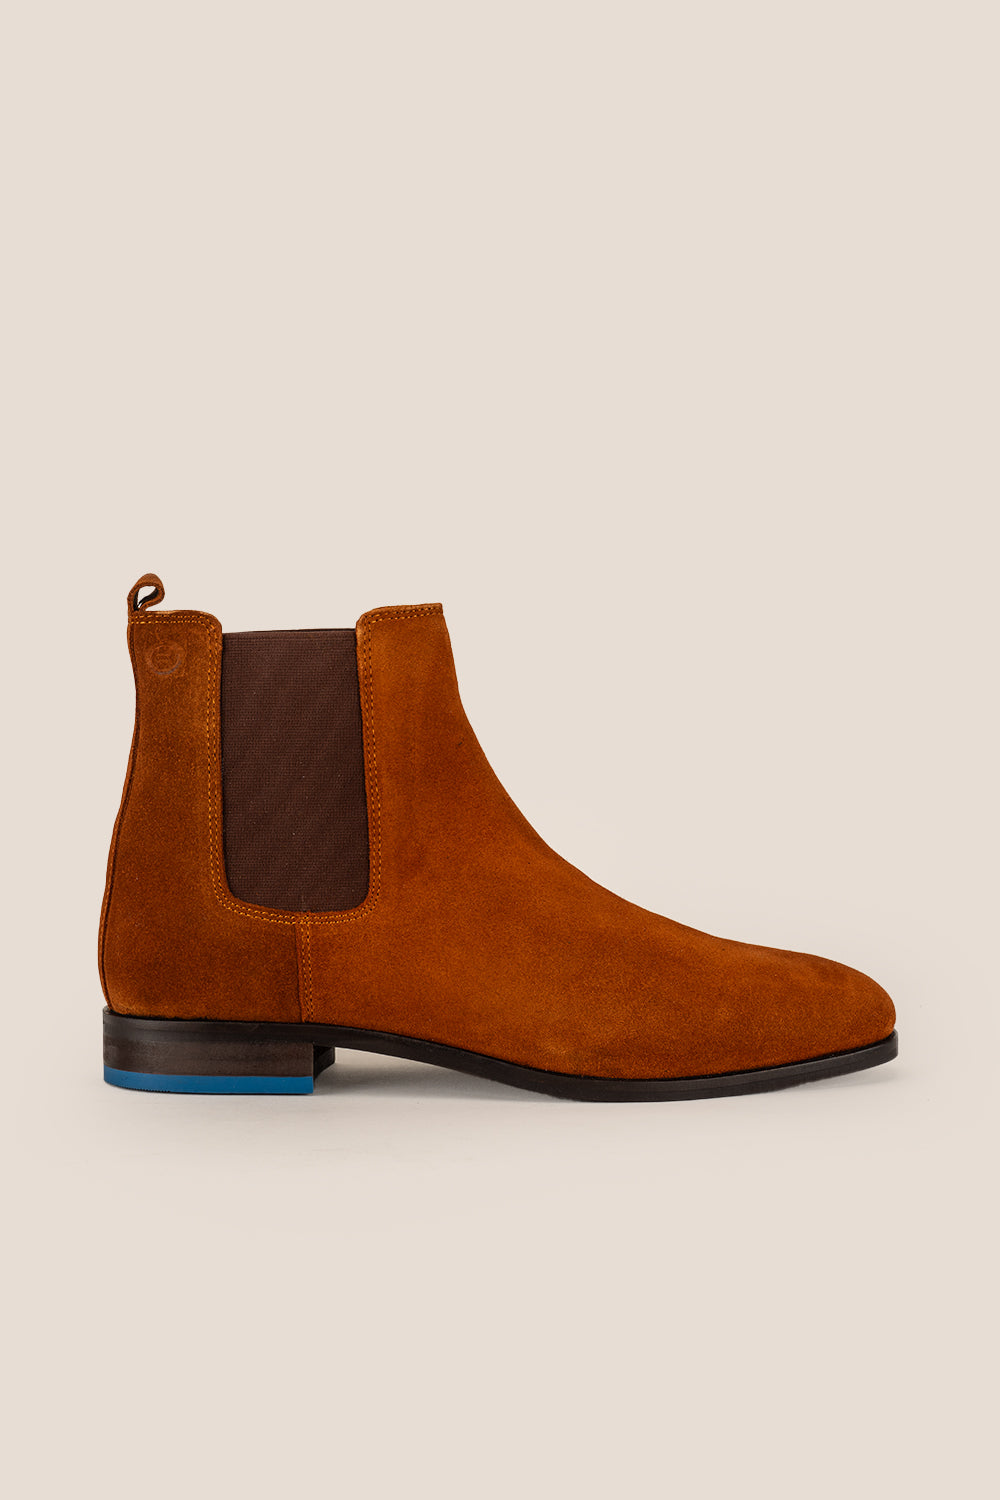 Vinnie Rust Suede Chelsea Boots | Oswin Hyde